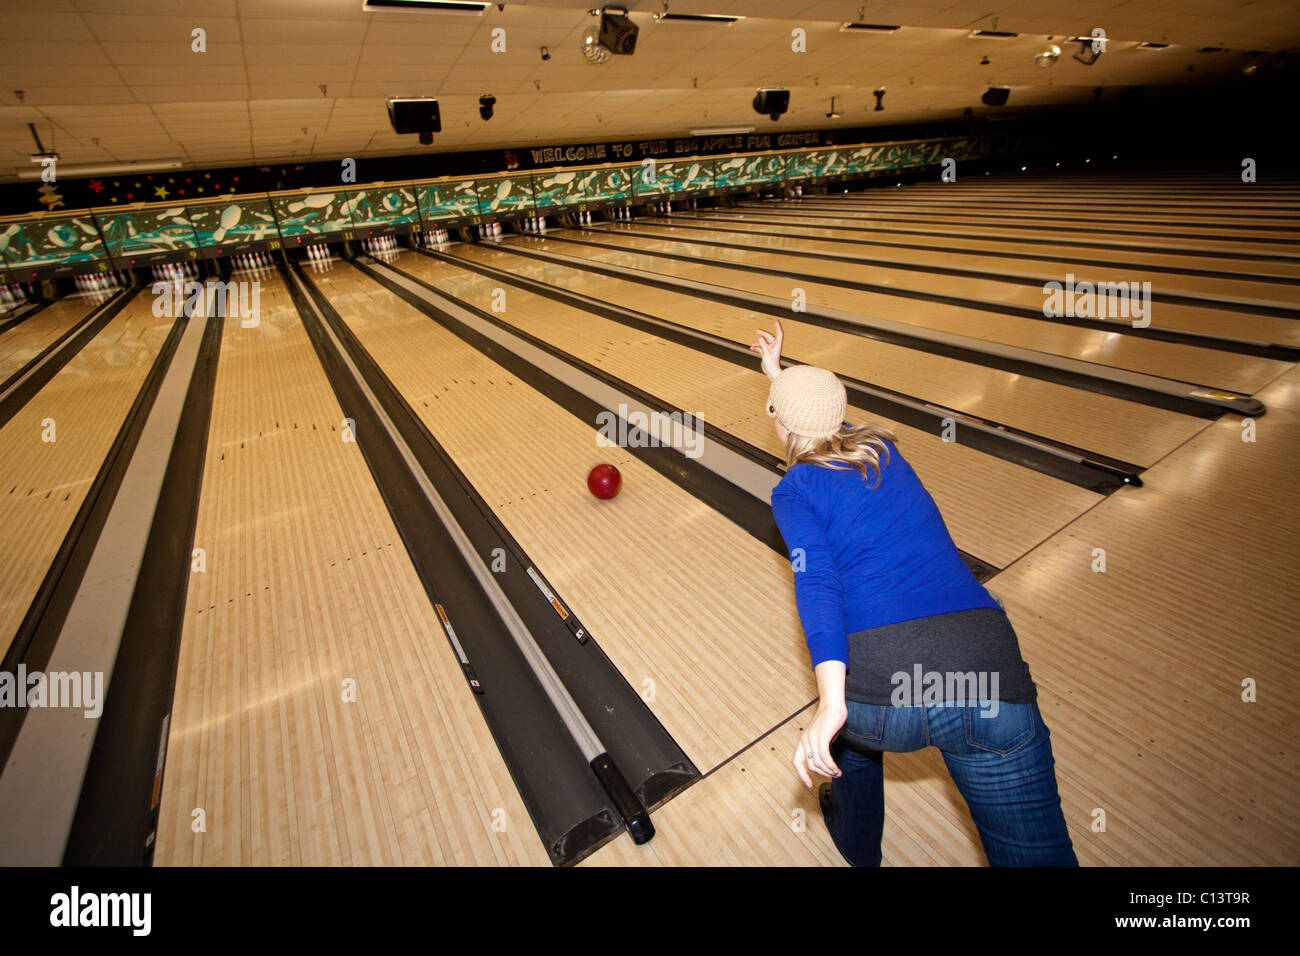 A woman bowls a bowling ball in an bowling alley, 12/29/2010 Stock Photo